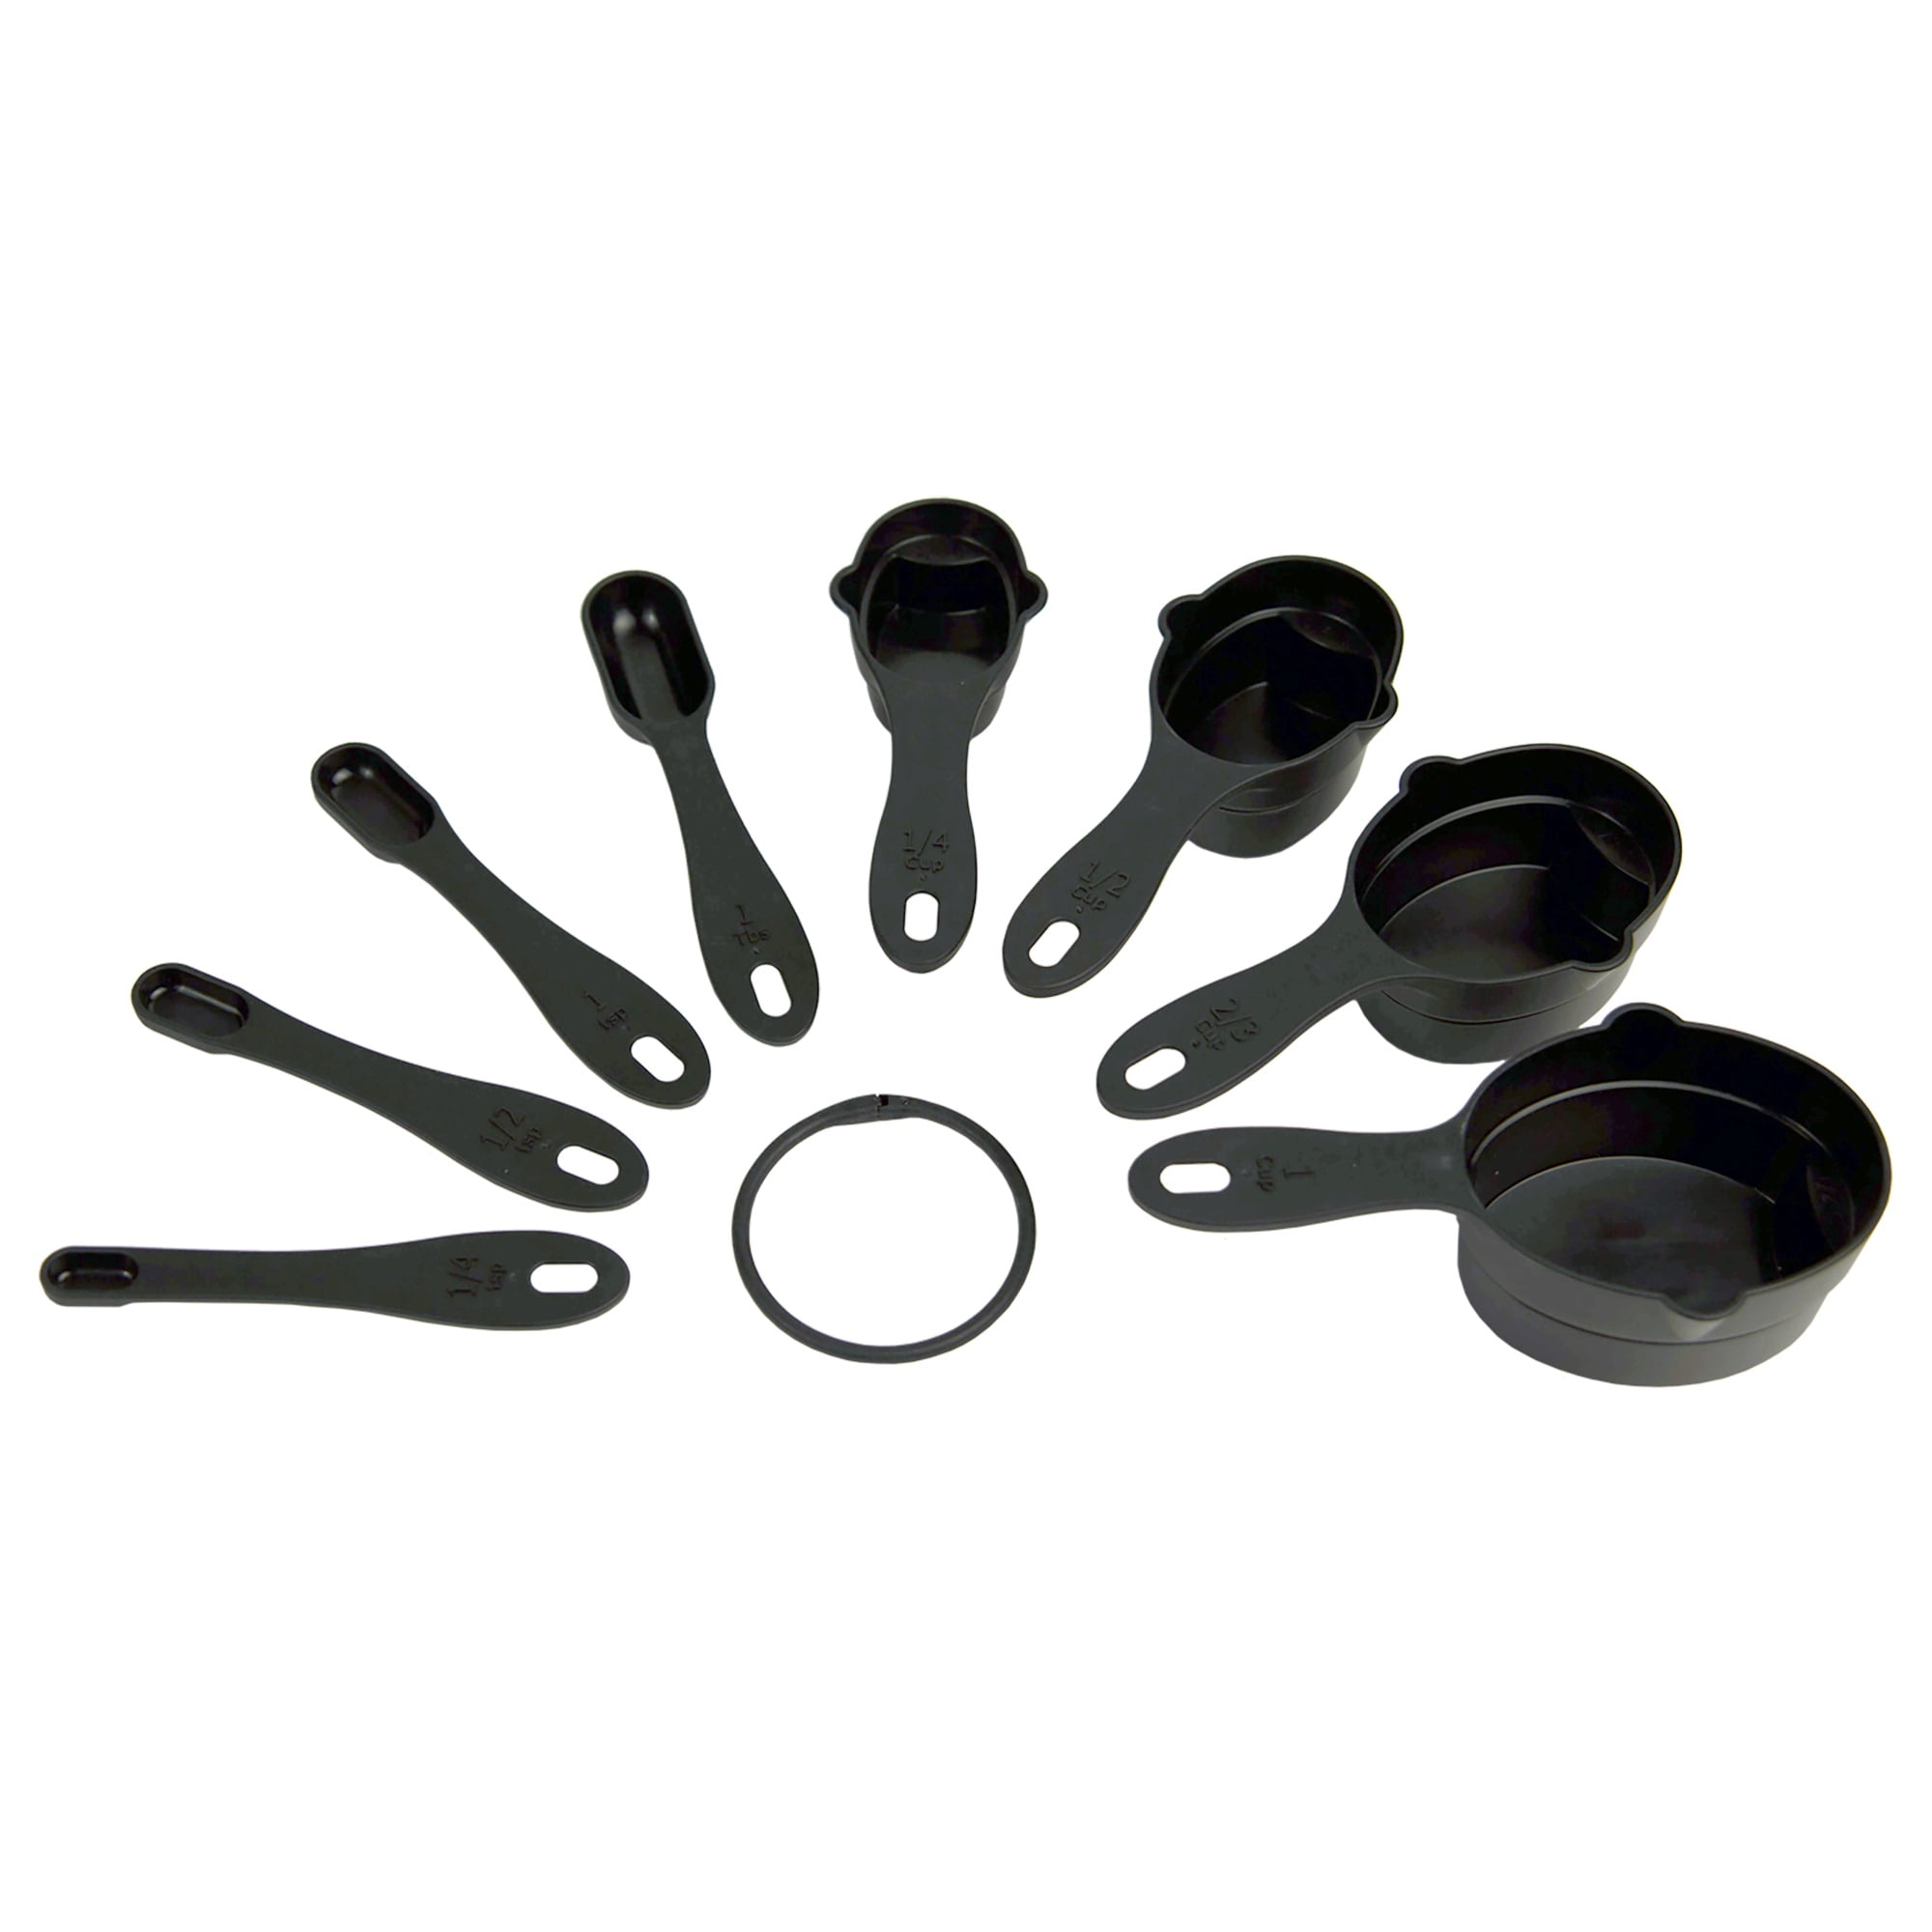 8-Piece Nylon Kitchen Utensil Set with Connector Ring, Black